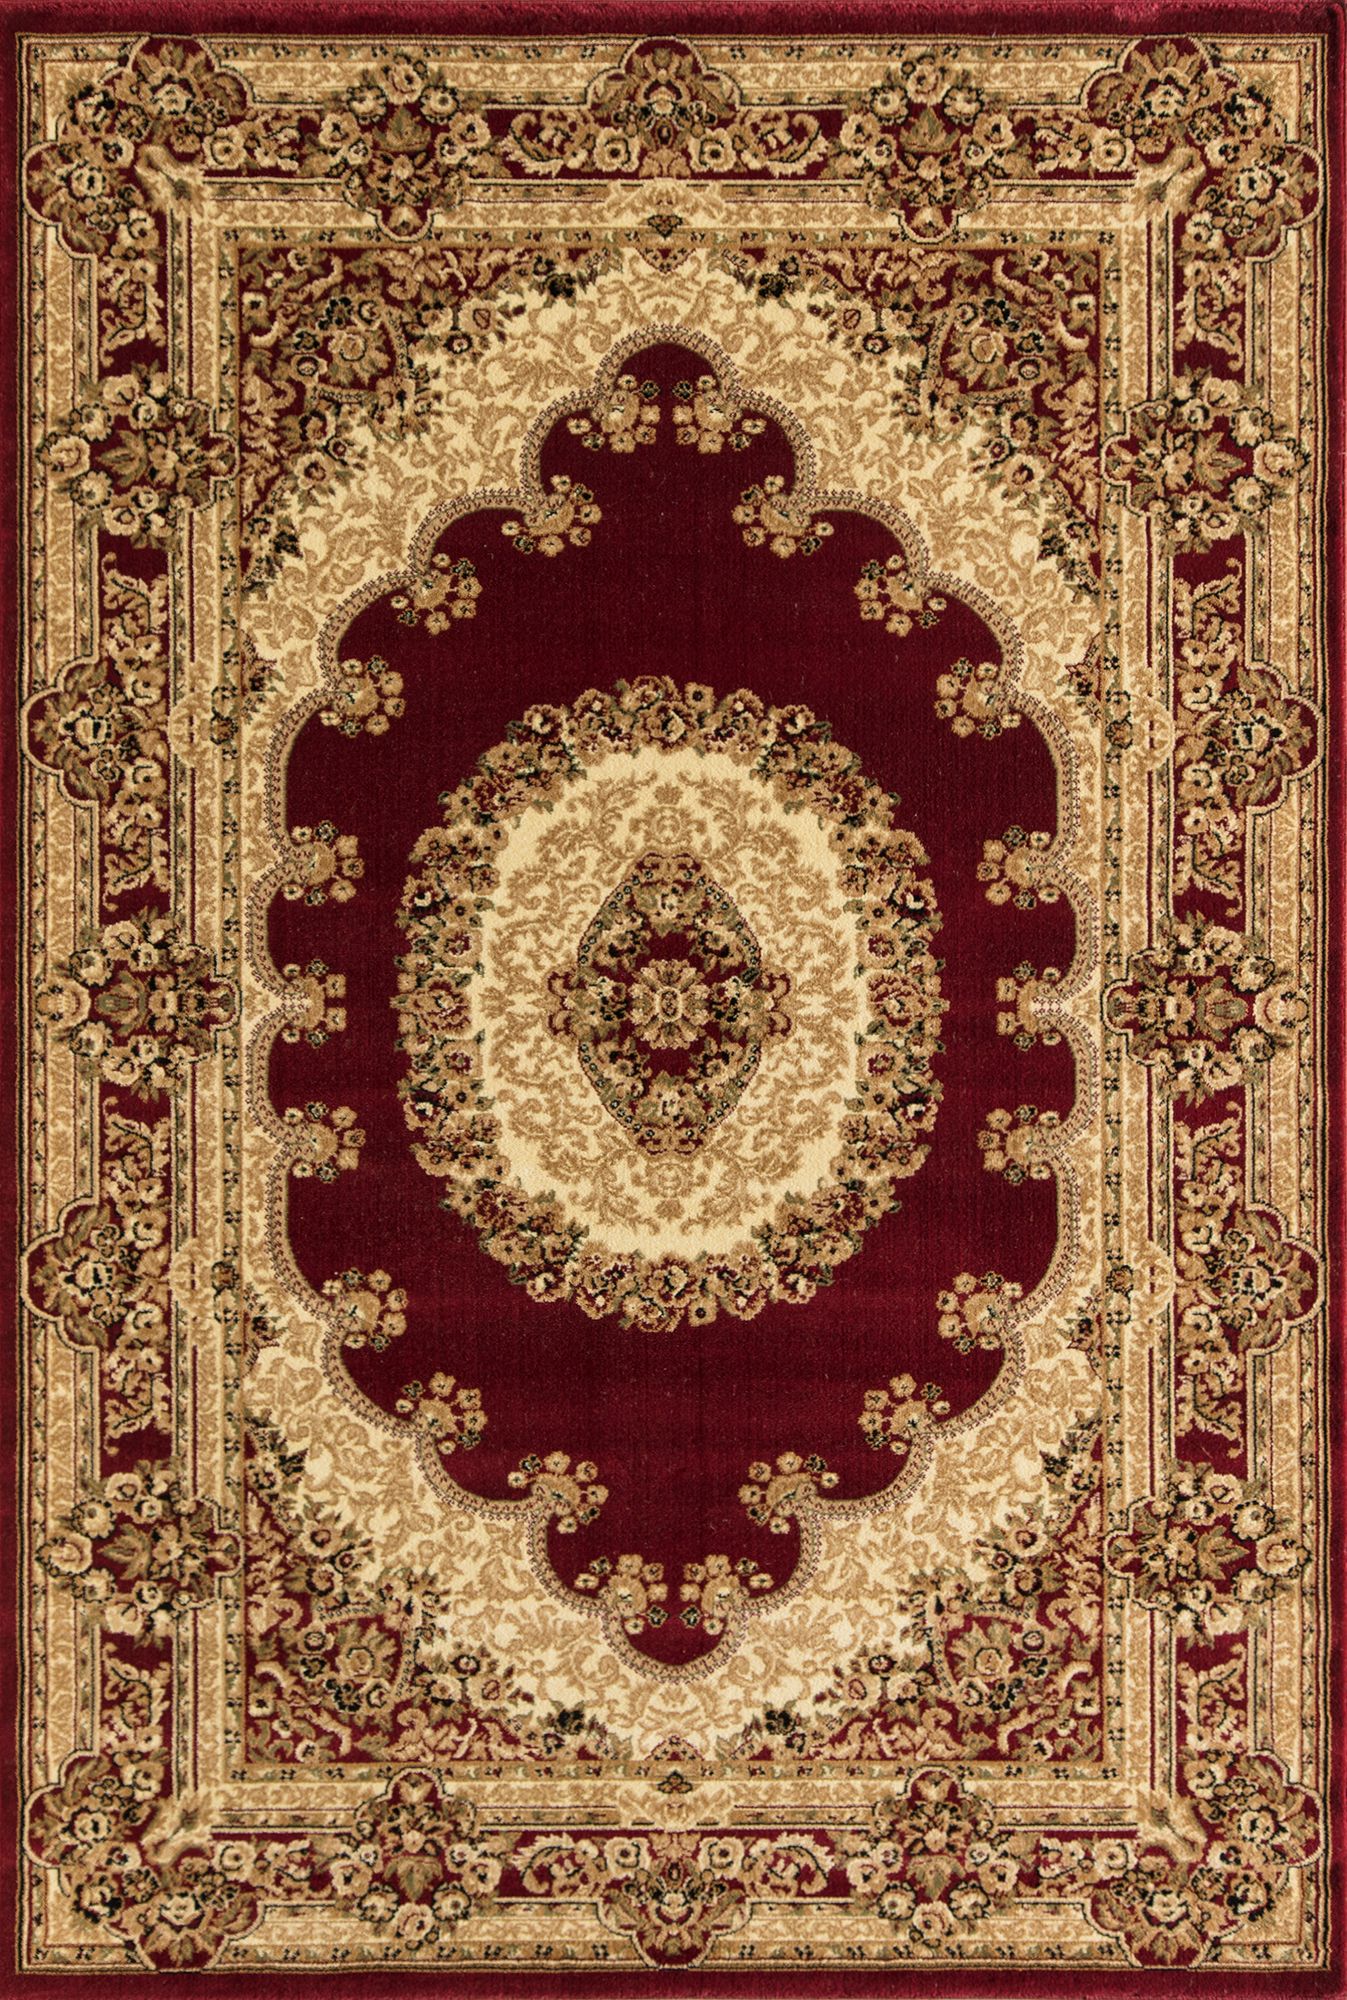 Rugs America Vista 807-RED Kerman Red Oriental Traditional Red Area Rug, 2'3"x7'10" - image 2 of 3